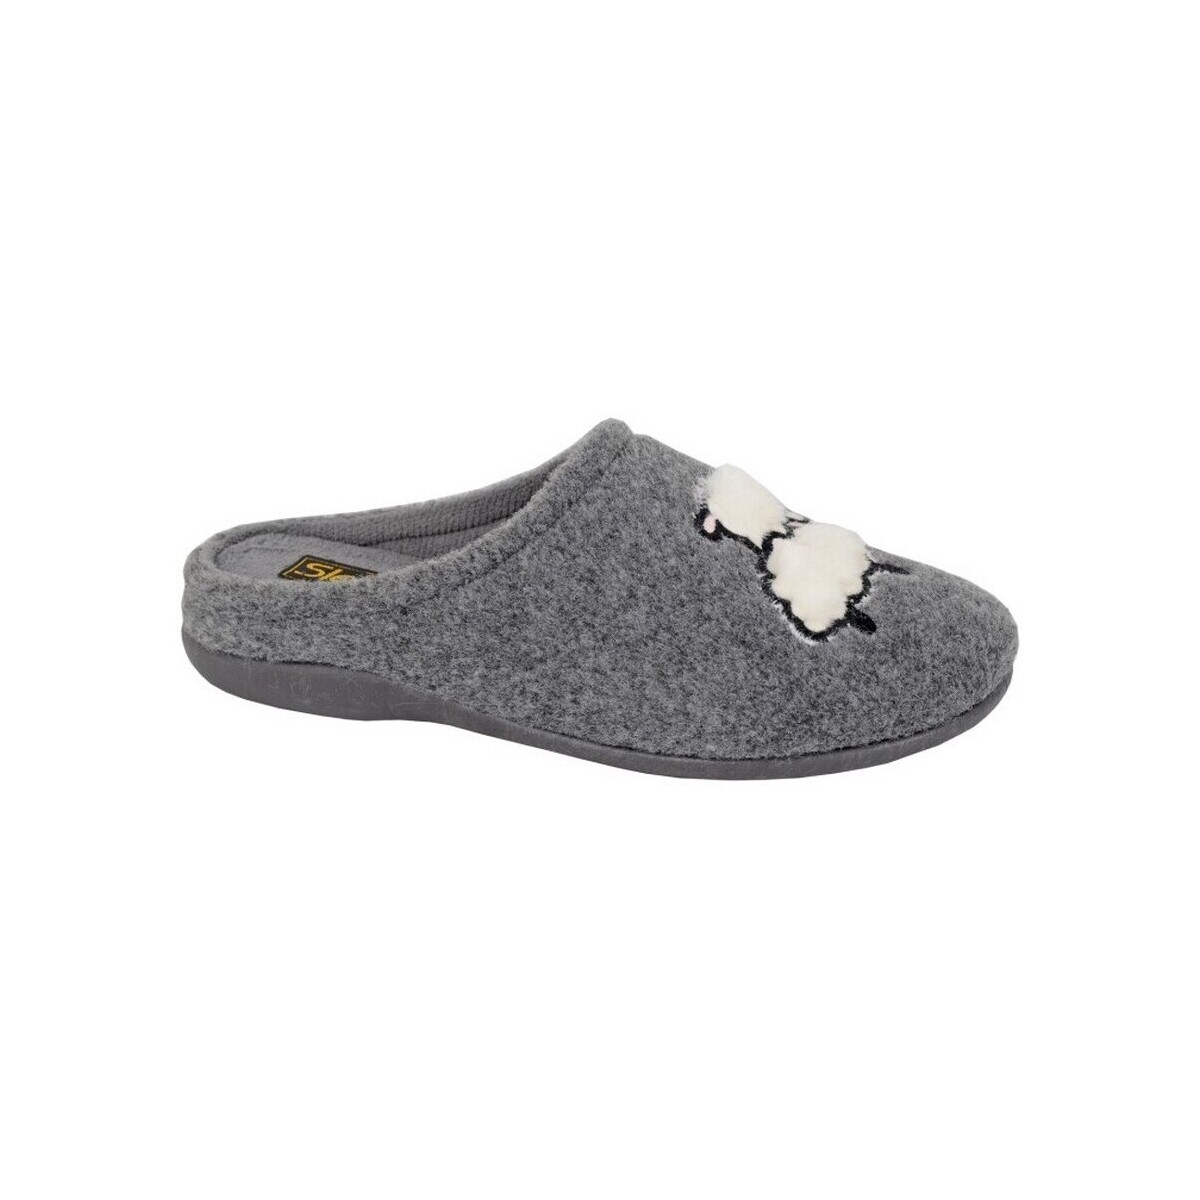 Chaussures Femme Chaussons Sleepers Suzie Gris